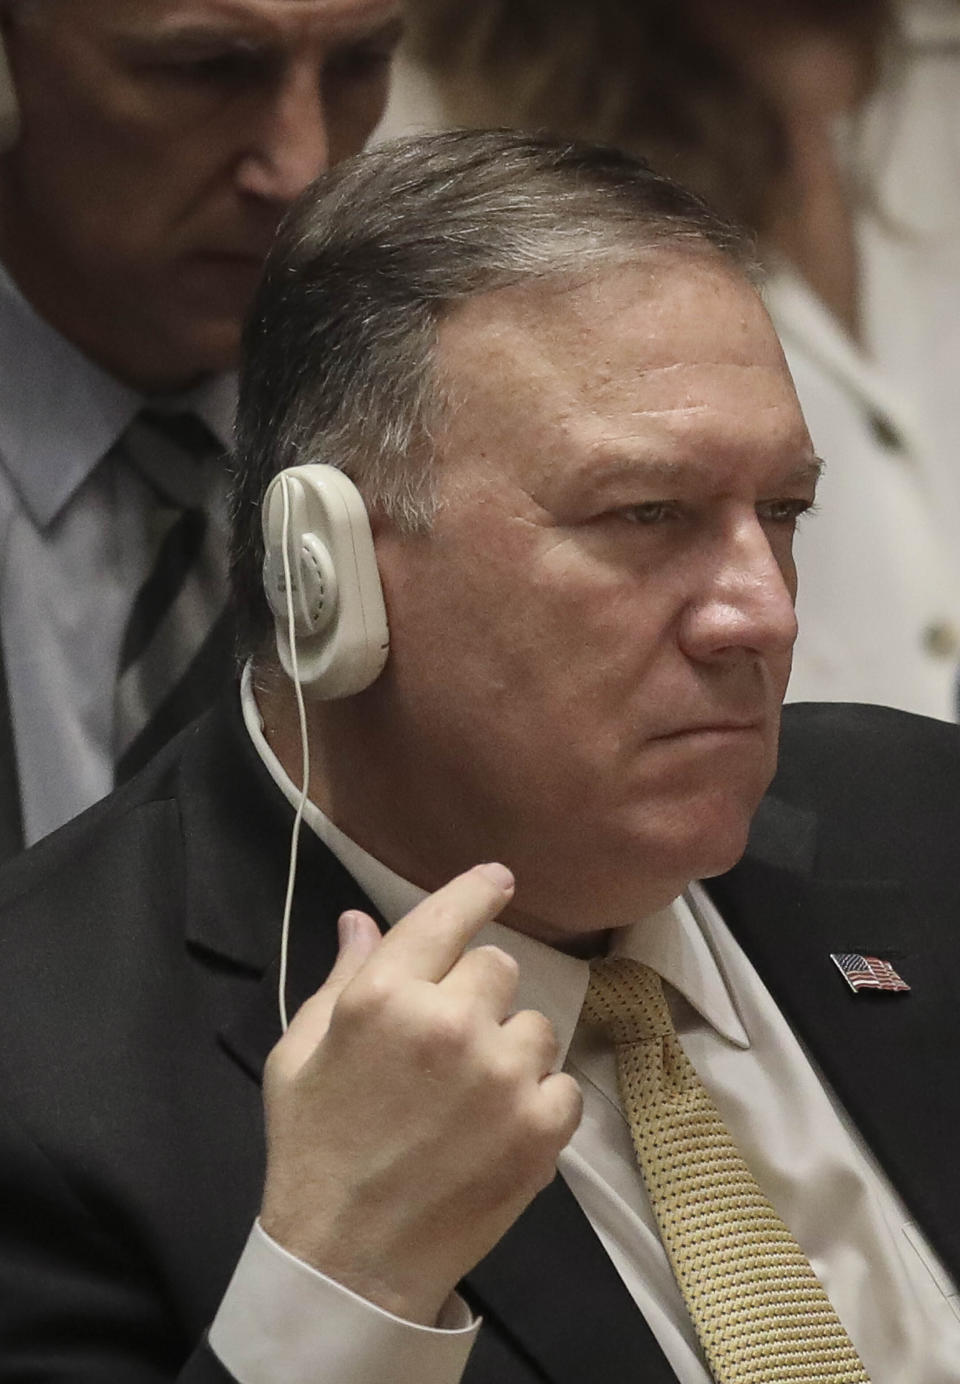 United States Secretary of State Michael Pompeo listens during a meeting of the United Nations Security Council on the Mideast, Tuesday, Aug. 20, 2019 at U.N. headquarters. (AP Photo/Bebeto Matthews)